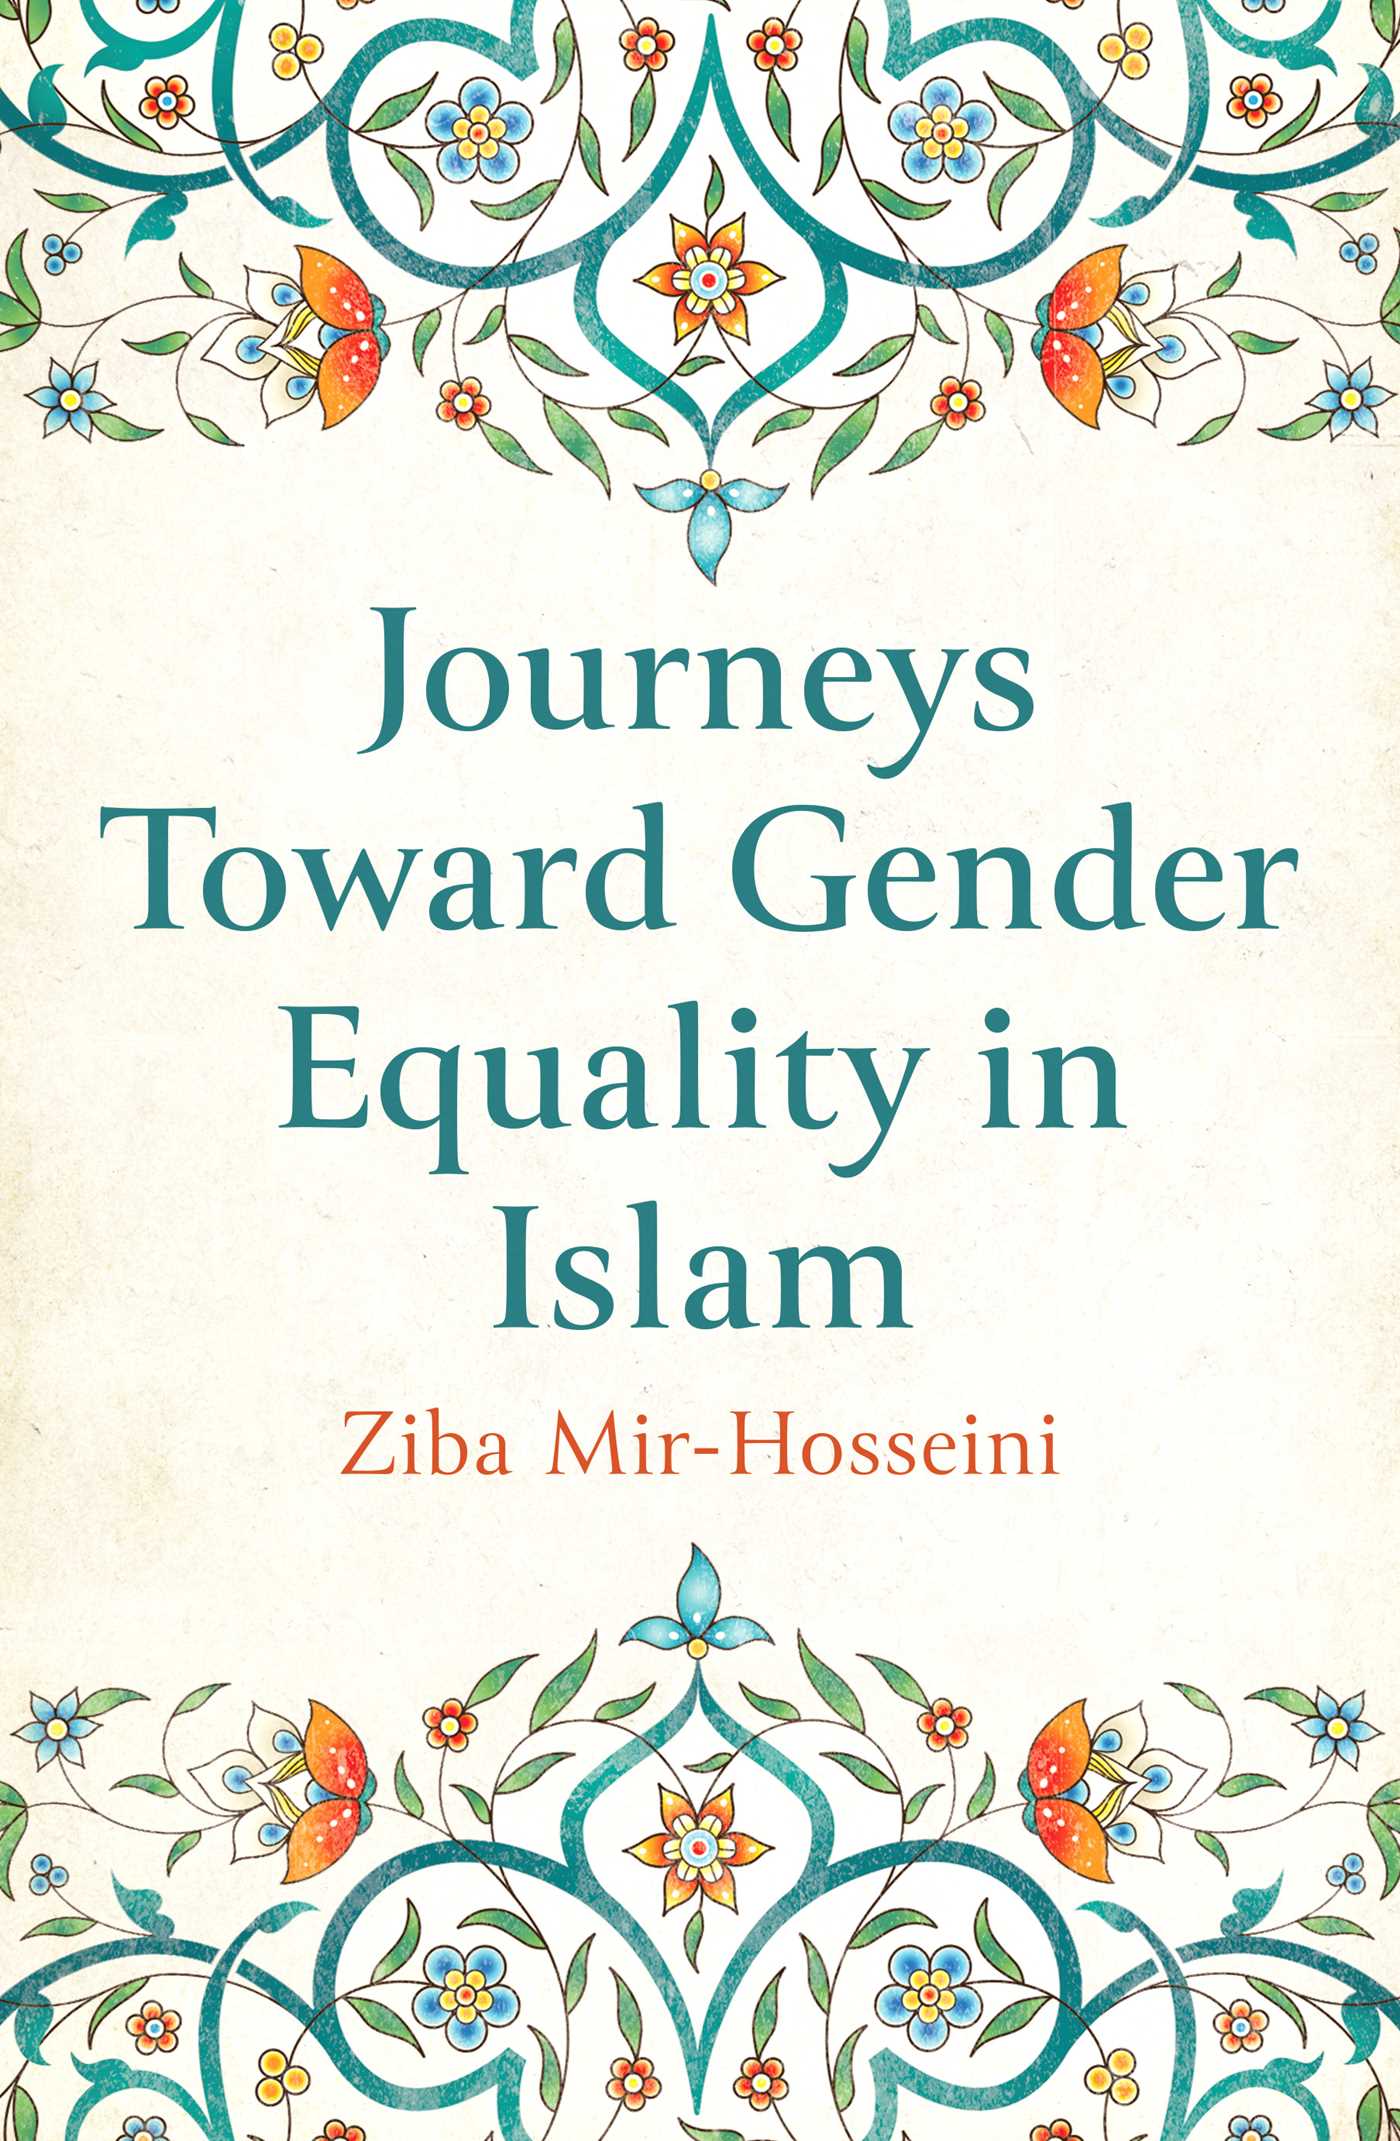 Cover of Ziba Mir-Hosseini's "Journeys Toward Gender Equality in Islam" (published by Simon &amp; Schuster)